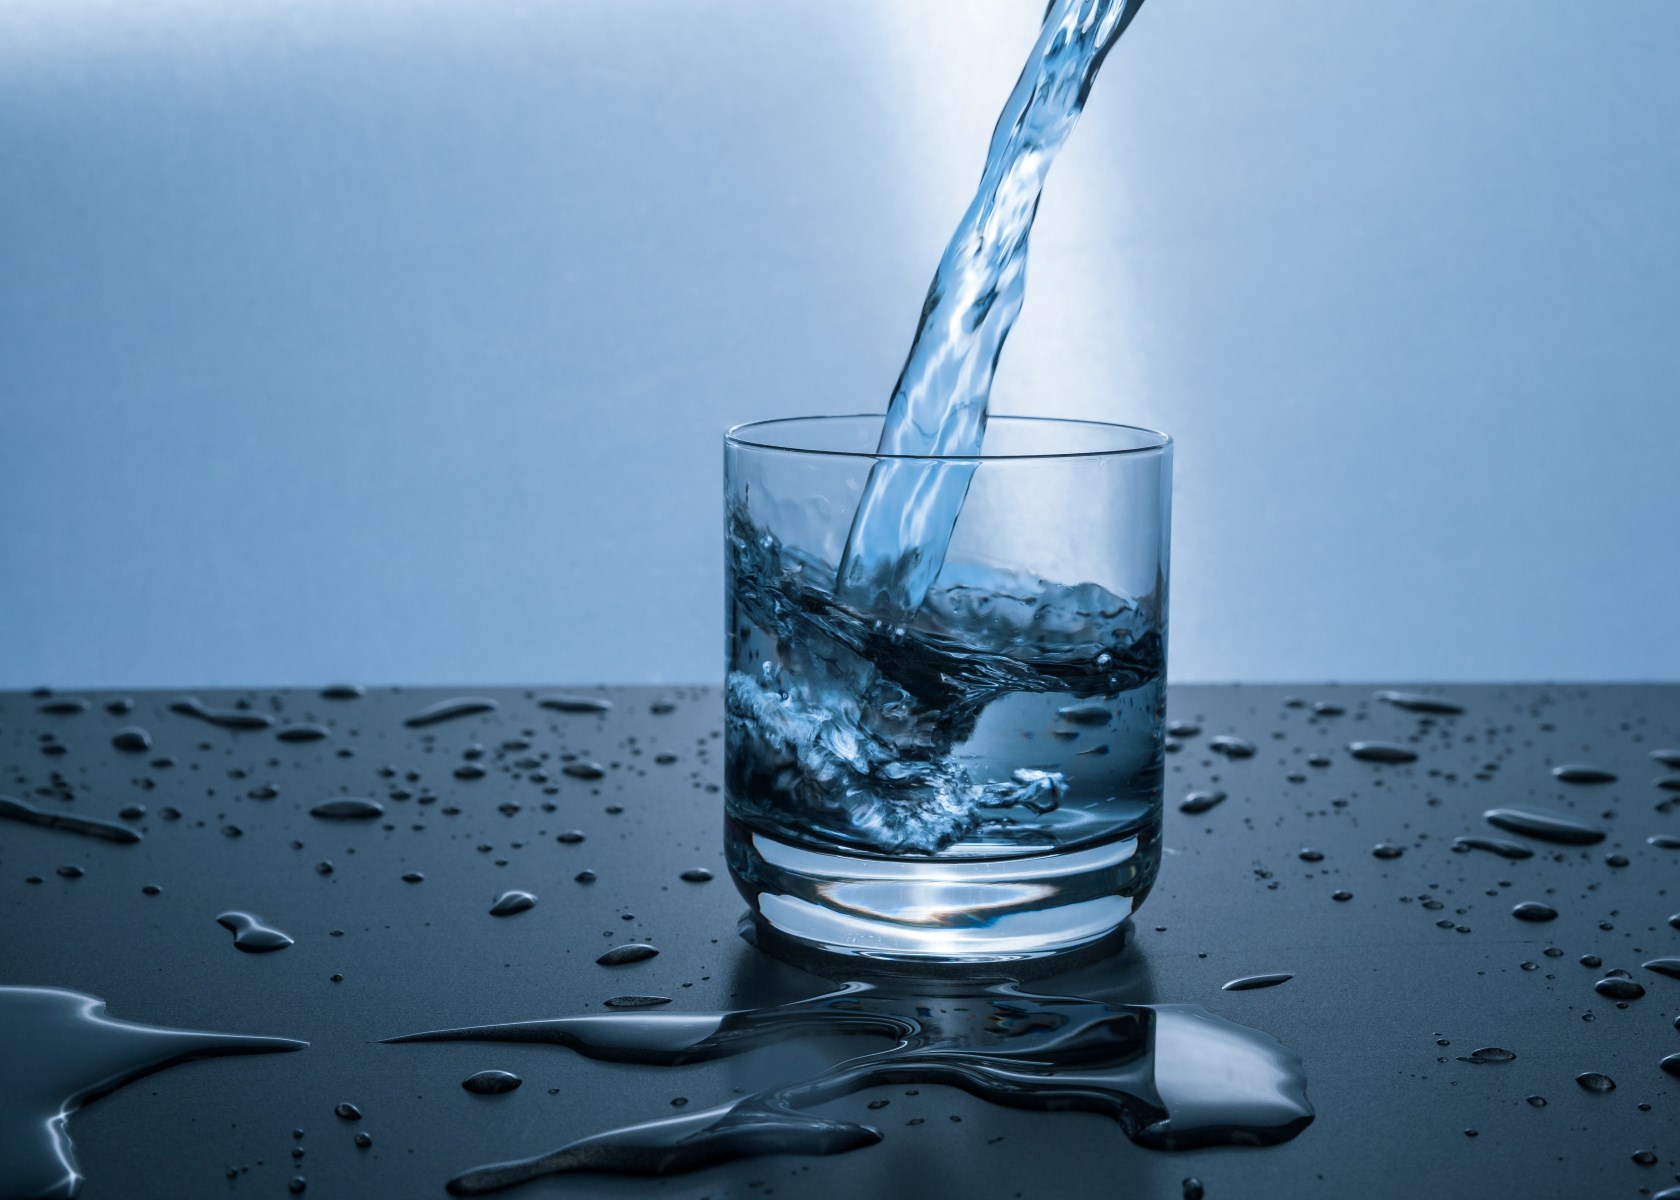 Which Ion Is Found In A Glass Of Water?